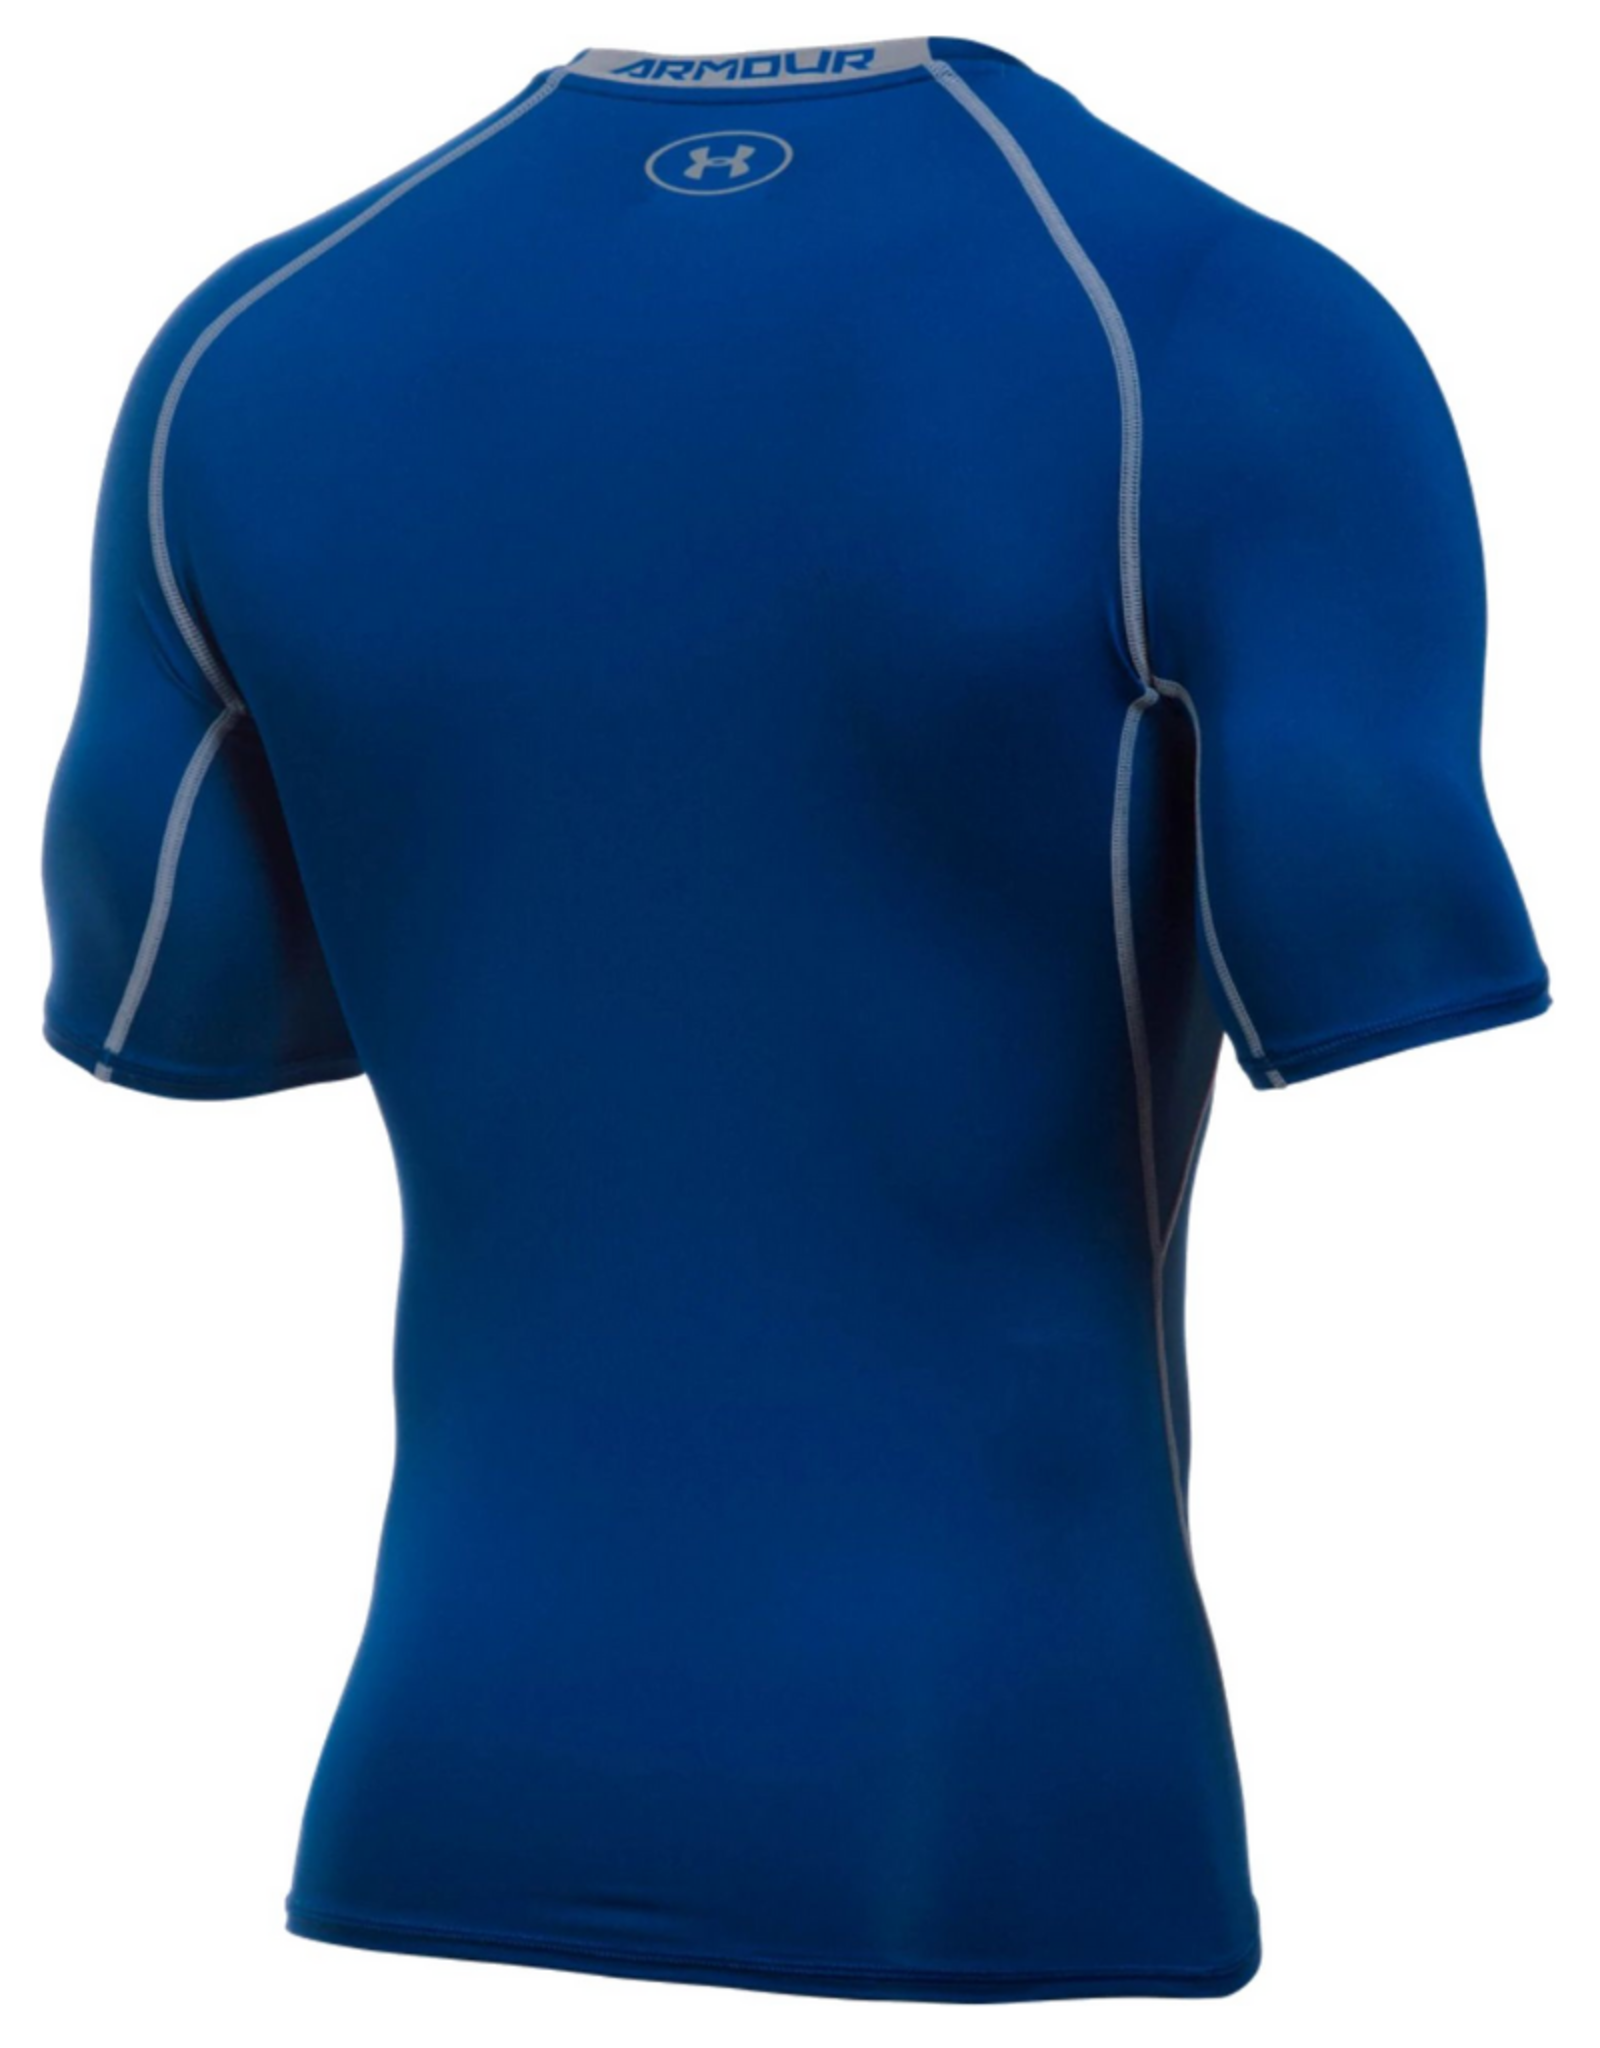 Under Armour Compression T-Shirt Royal